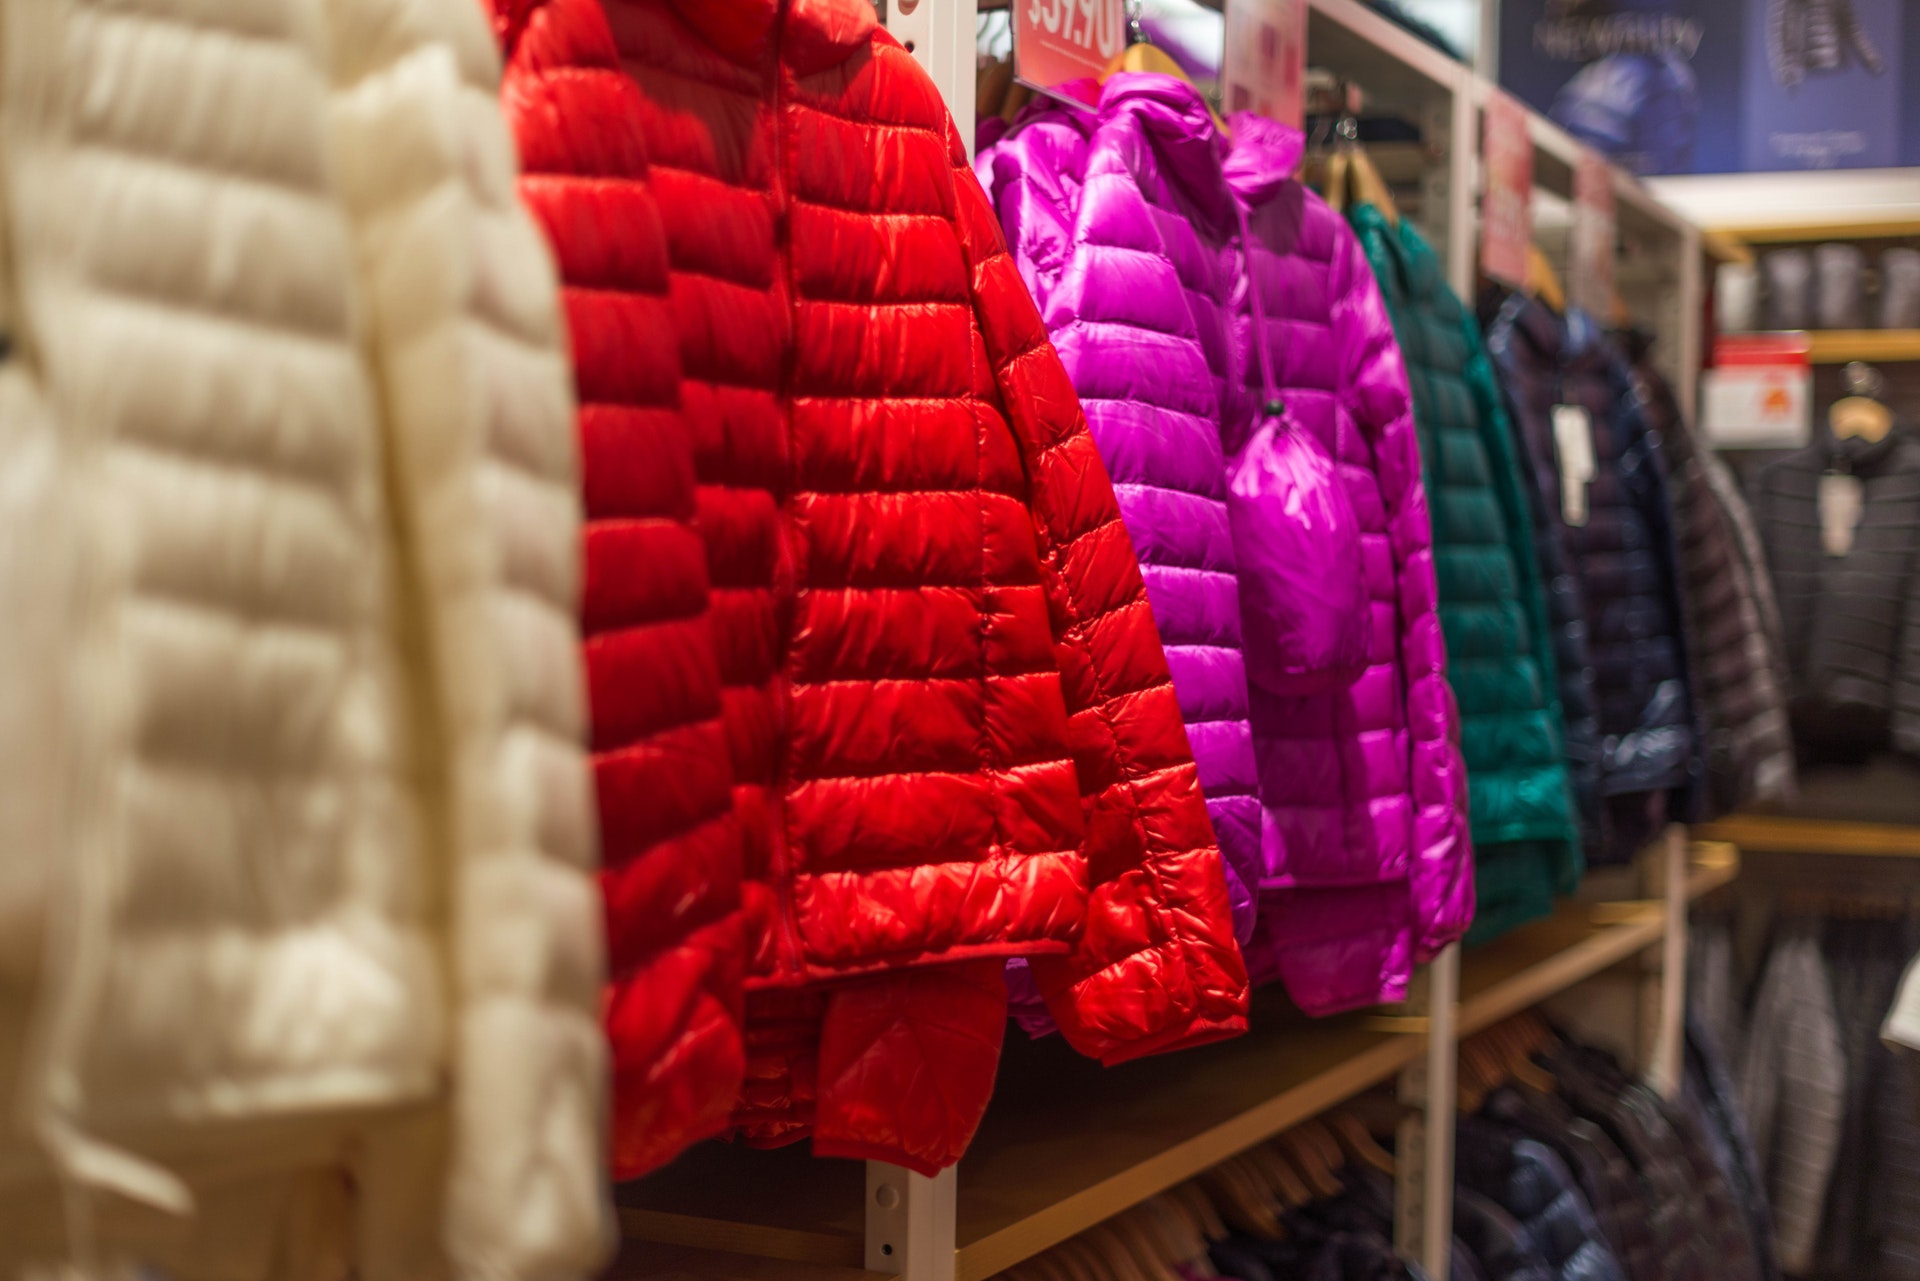 This is an image of colorful jackets at a retail store.